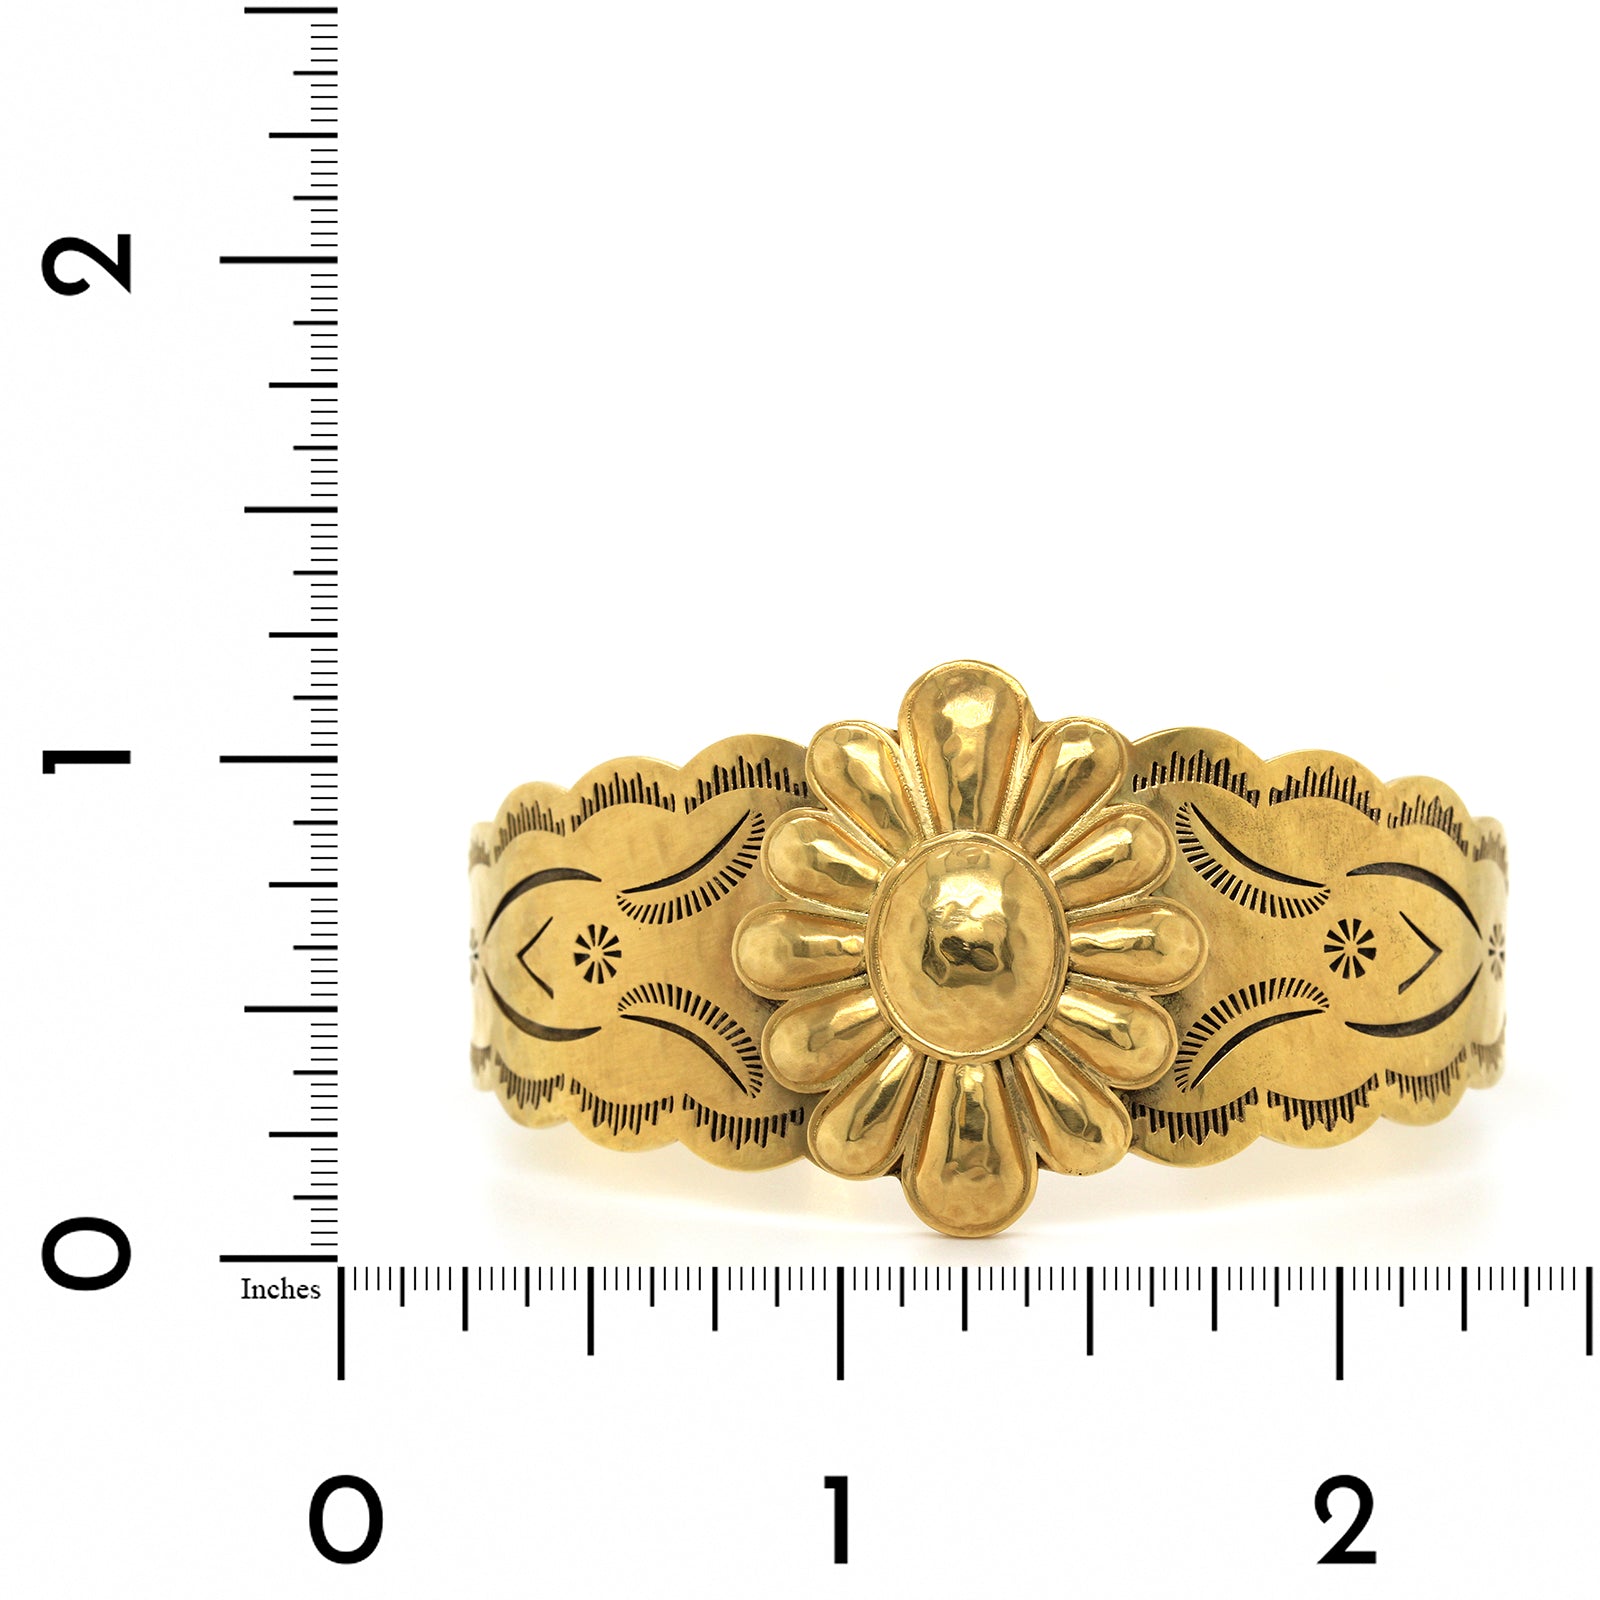 18K Yellow Gold Native Collection Flower Cuff Bracelet